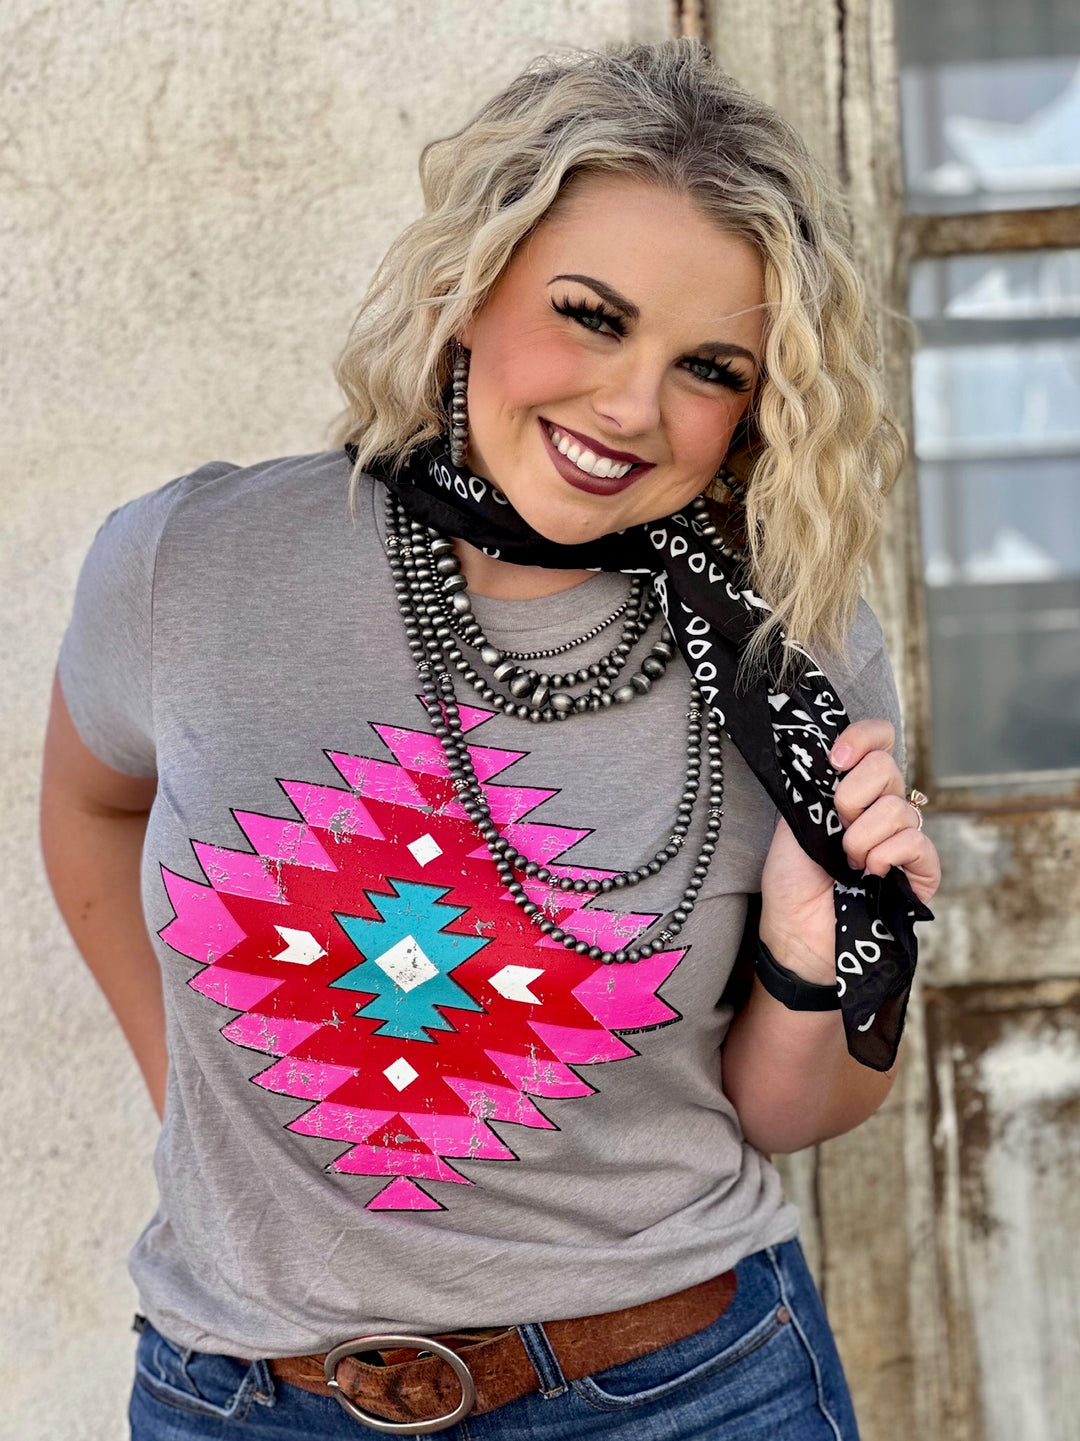 Poppin' Pink Grey Graphic Tee by Texas True Threads